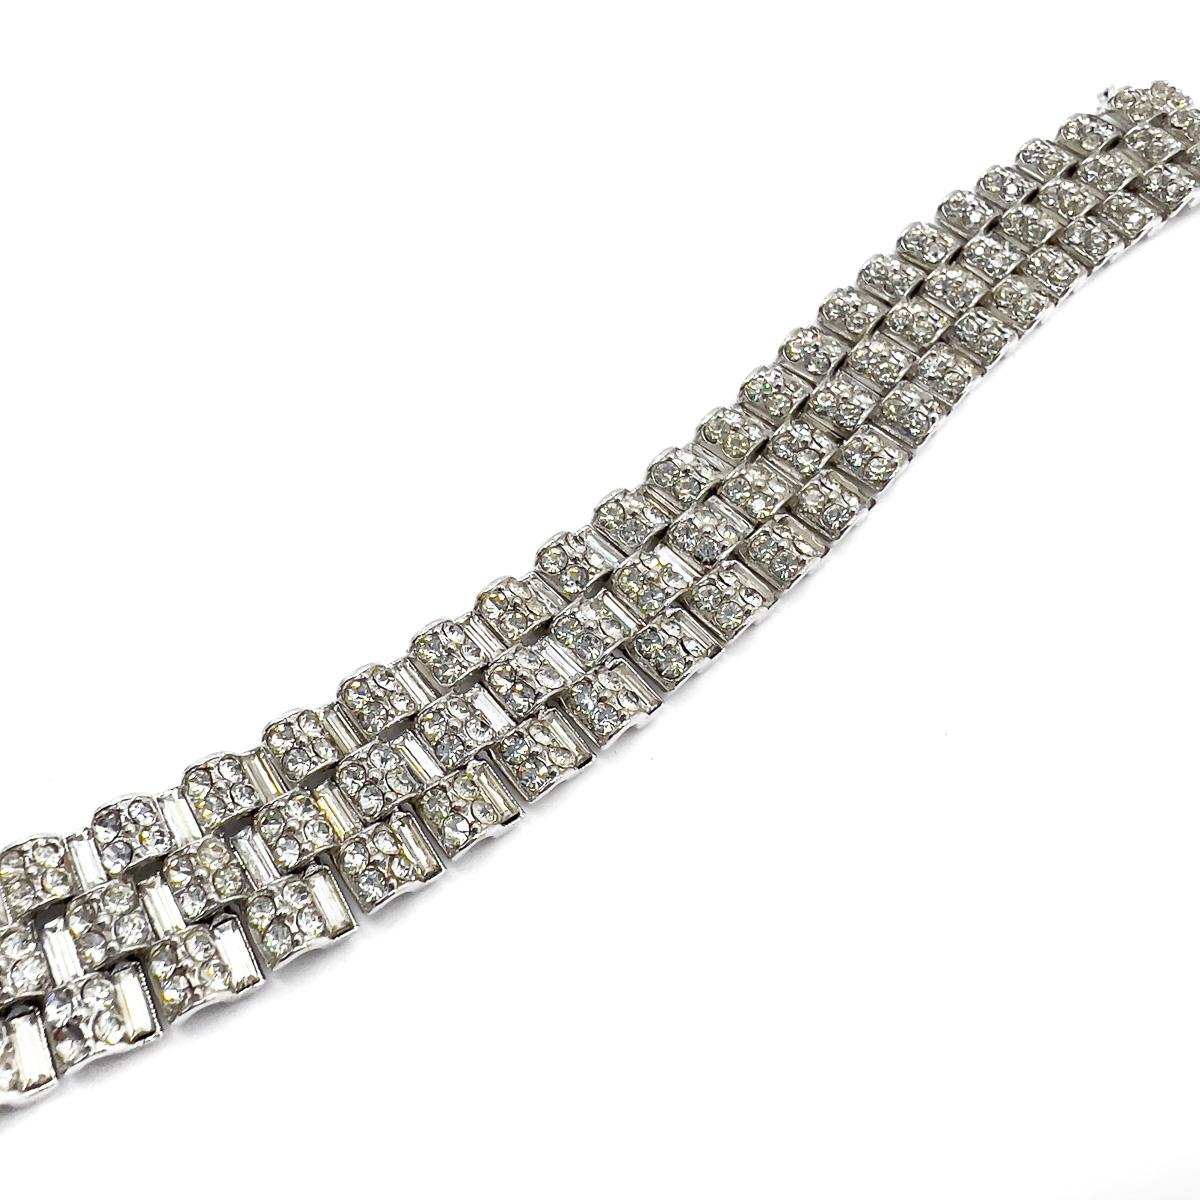 A super stylish Vintage Deco Tank Track Bracelet. Inspired by the earlier Art Deco cocktail bracelets, this mid century piece of wearable art is a killer style classic that will prove itself time and time again.  
An unsigned beauty. A rare